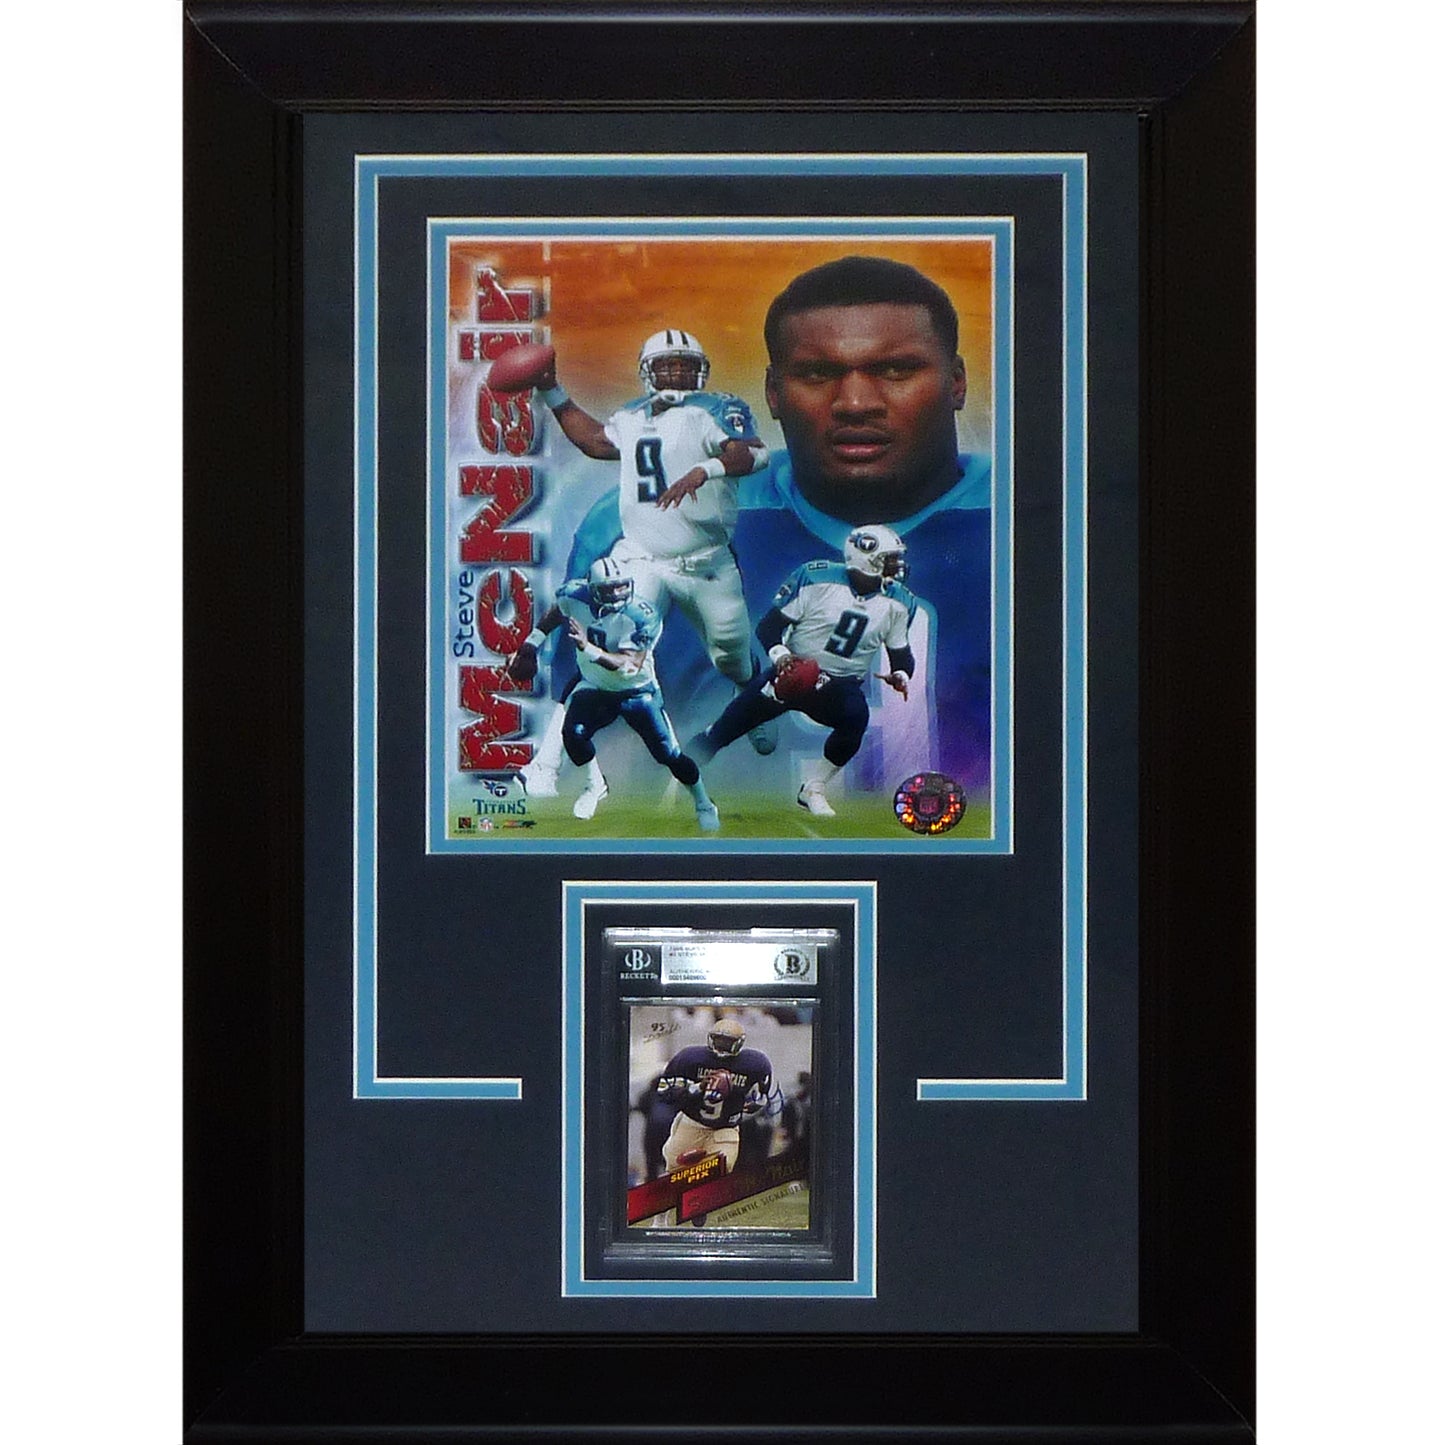 Steve McNair Autographed Rookie Card Deluxe Framed with Houston Oilers 8x10 Photo - Beckett